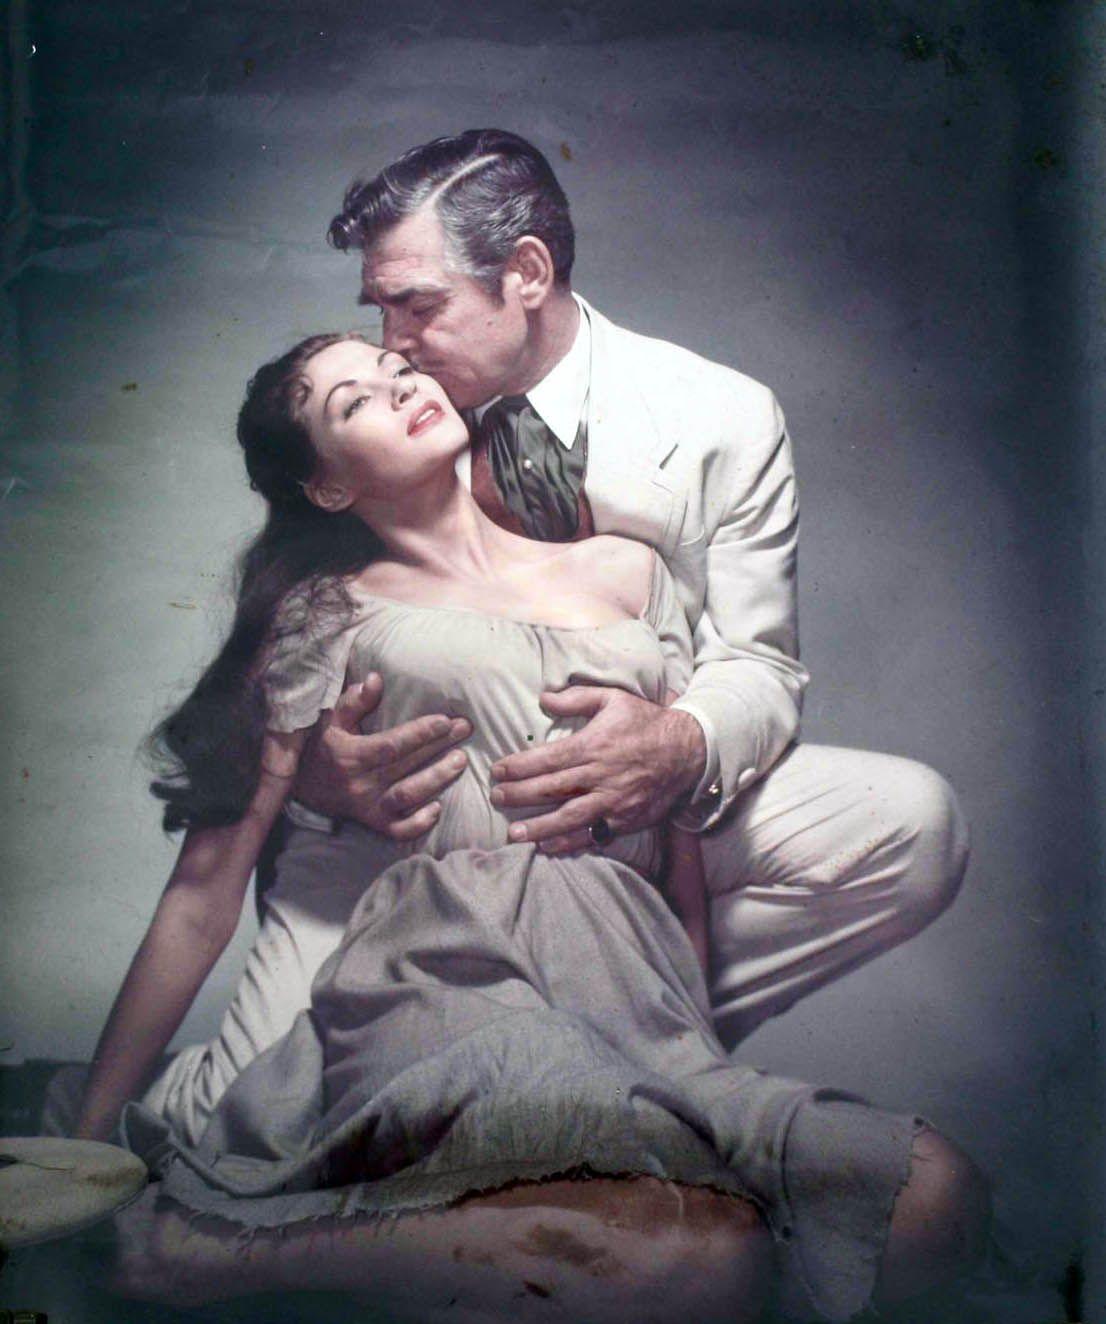 Clark Gable, Yvonne de Carlo, Band of Angels, 1957. This was